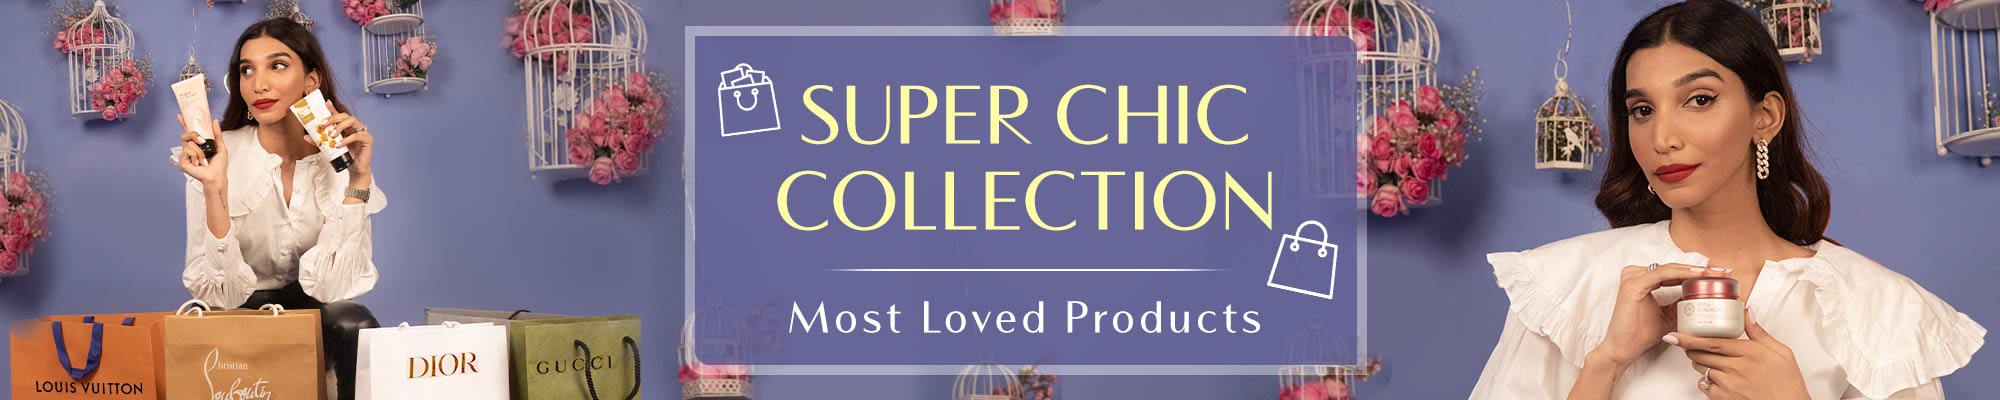 Super Chic Collection (Most Loved Products)